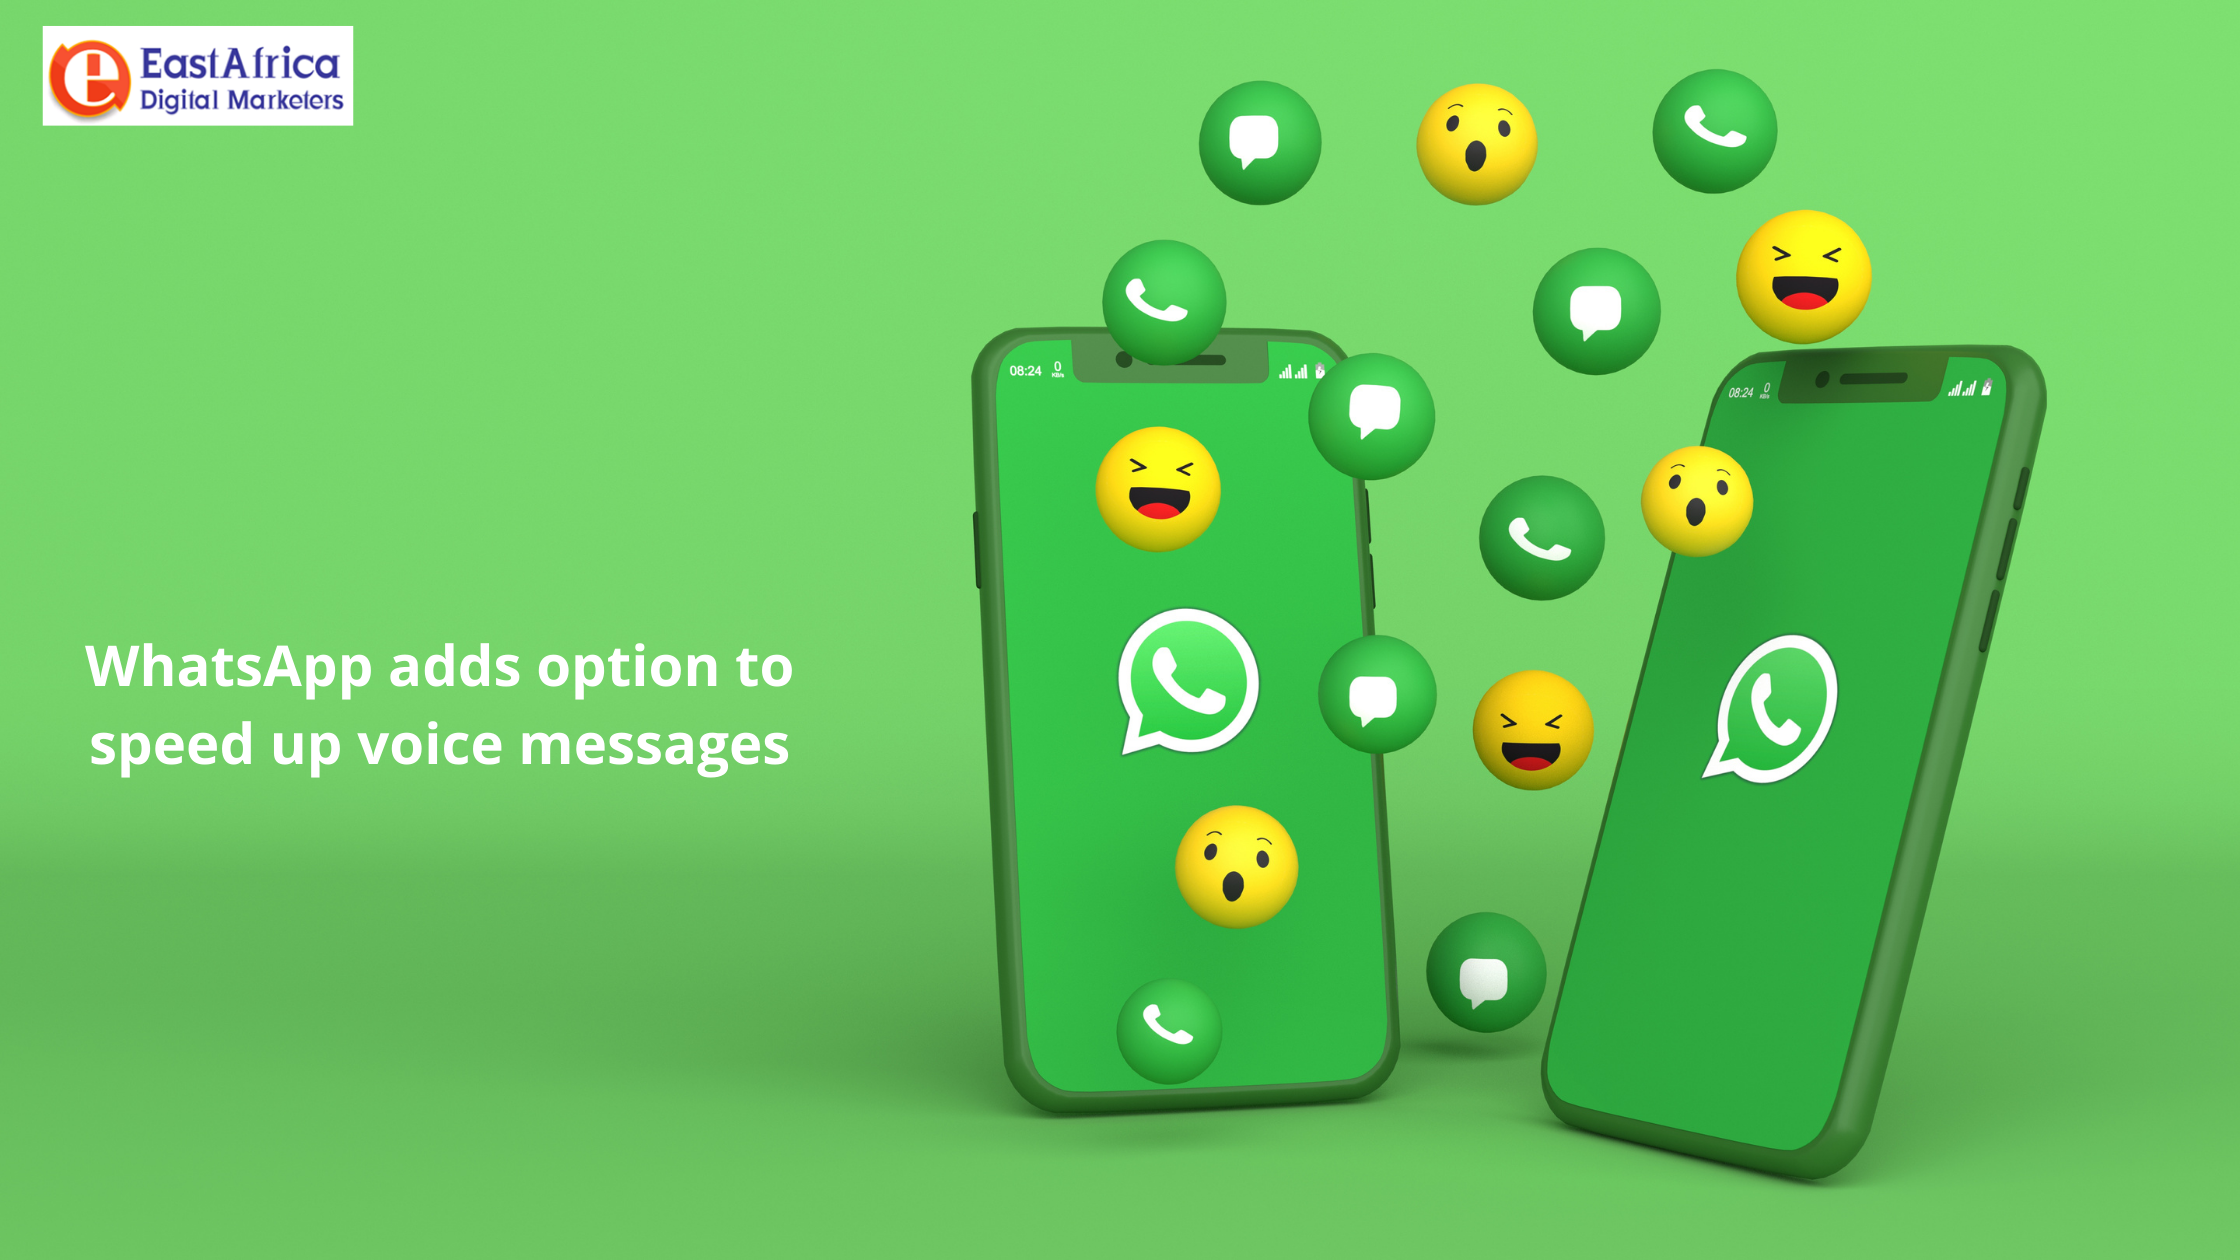 WhatsApp adds option to speed up voice messages